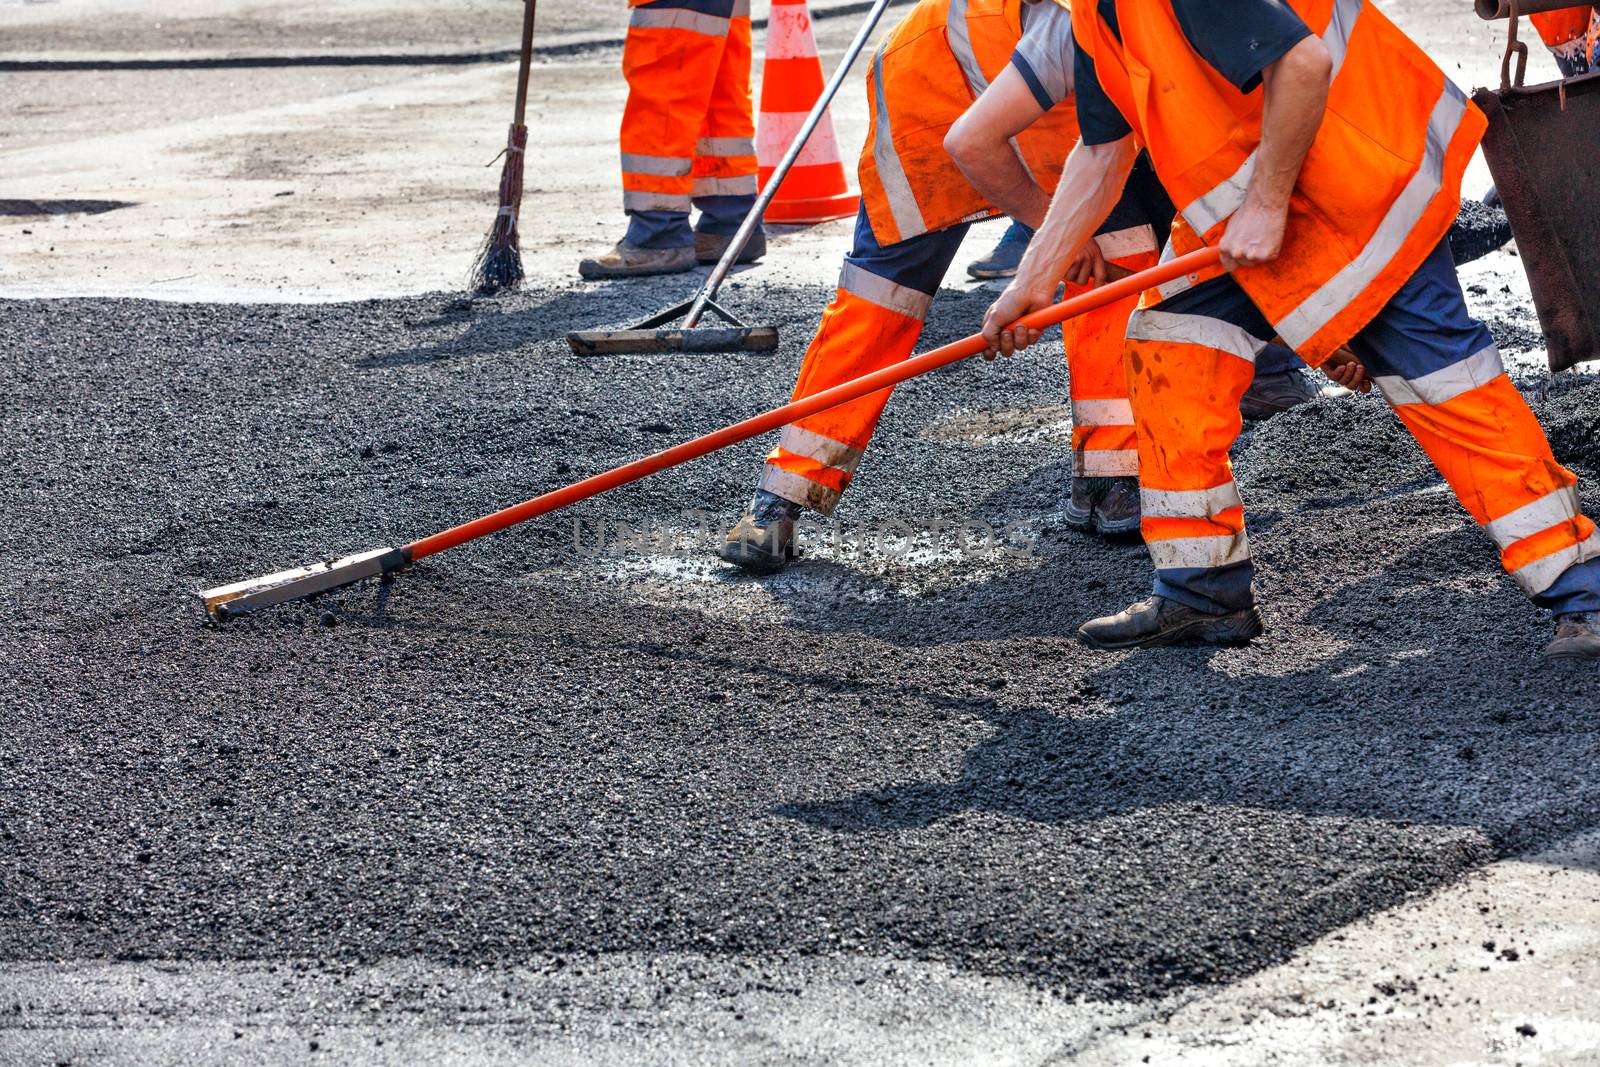 A working group of road workers in orange overalls renews a section of the road with fresh hot asphalt and smooths it out for repair with metal levels.